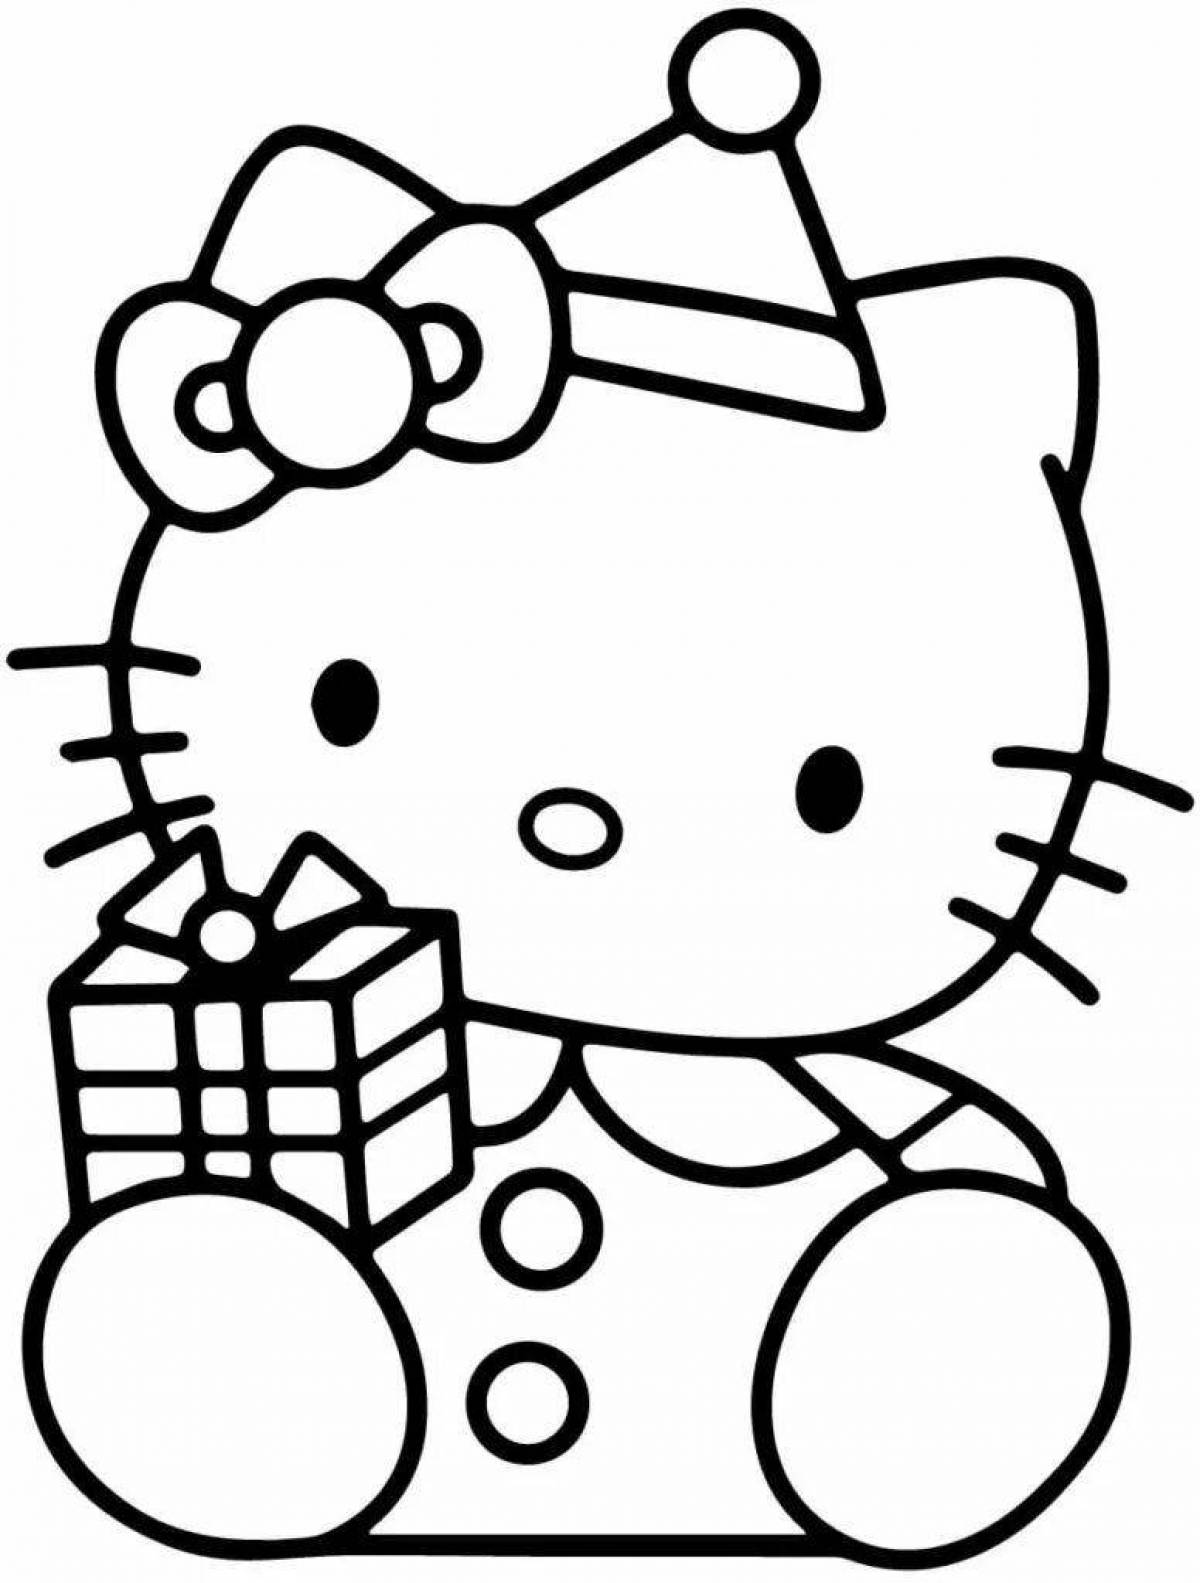 Coloring book funny hello kitty characters